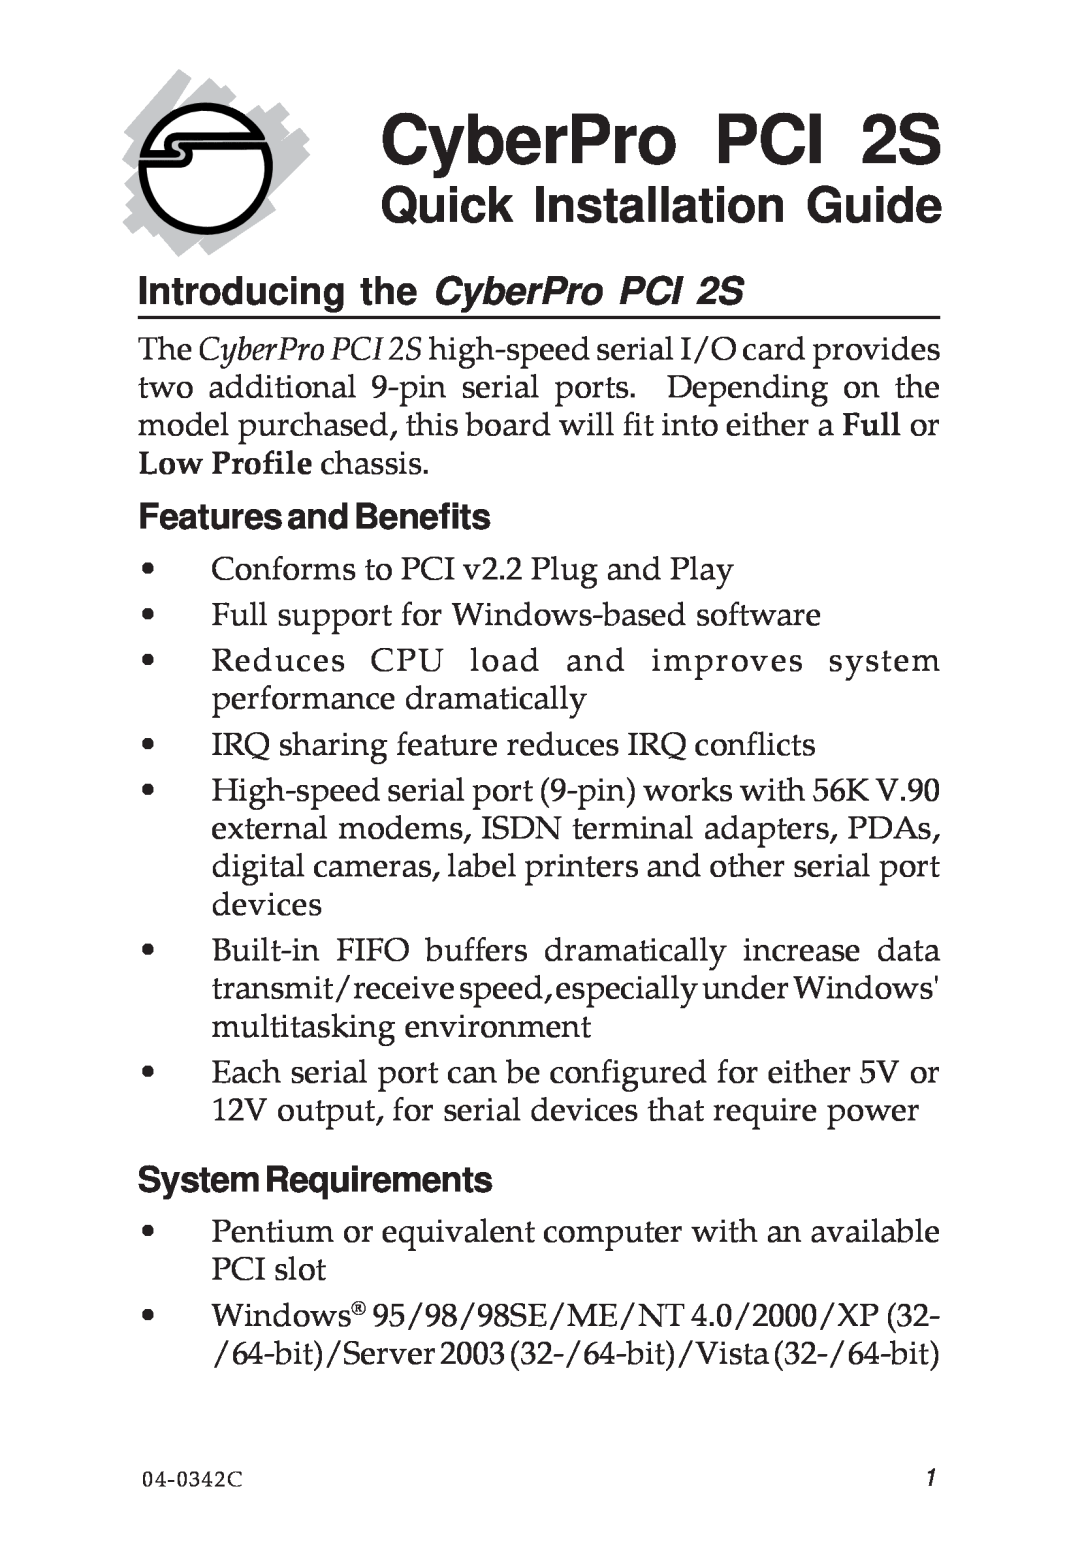 SIIG manual Introducing the CyberPro PCI 2S, Features and Benefits, SystemRequirements, Quick Installation Guide 